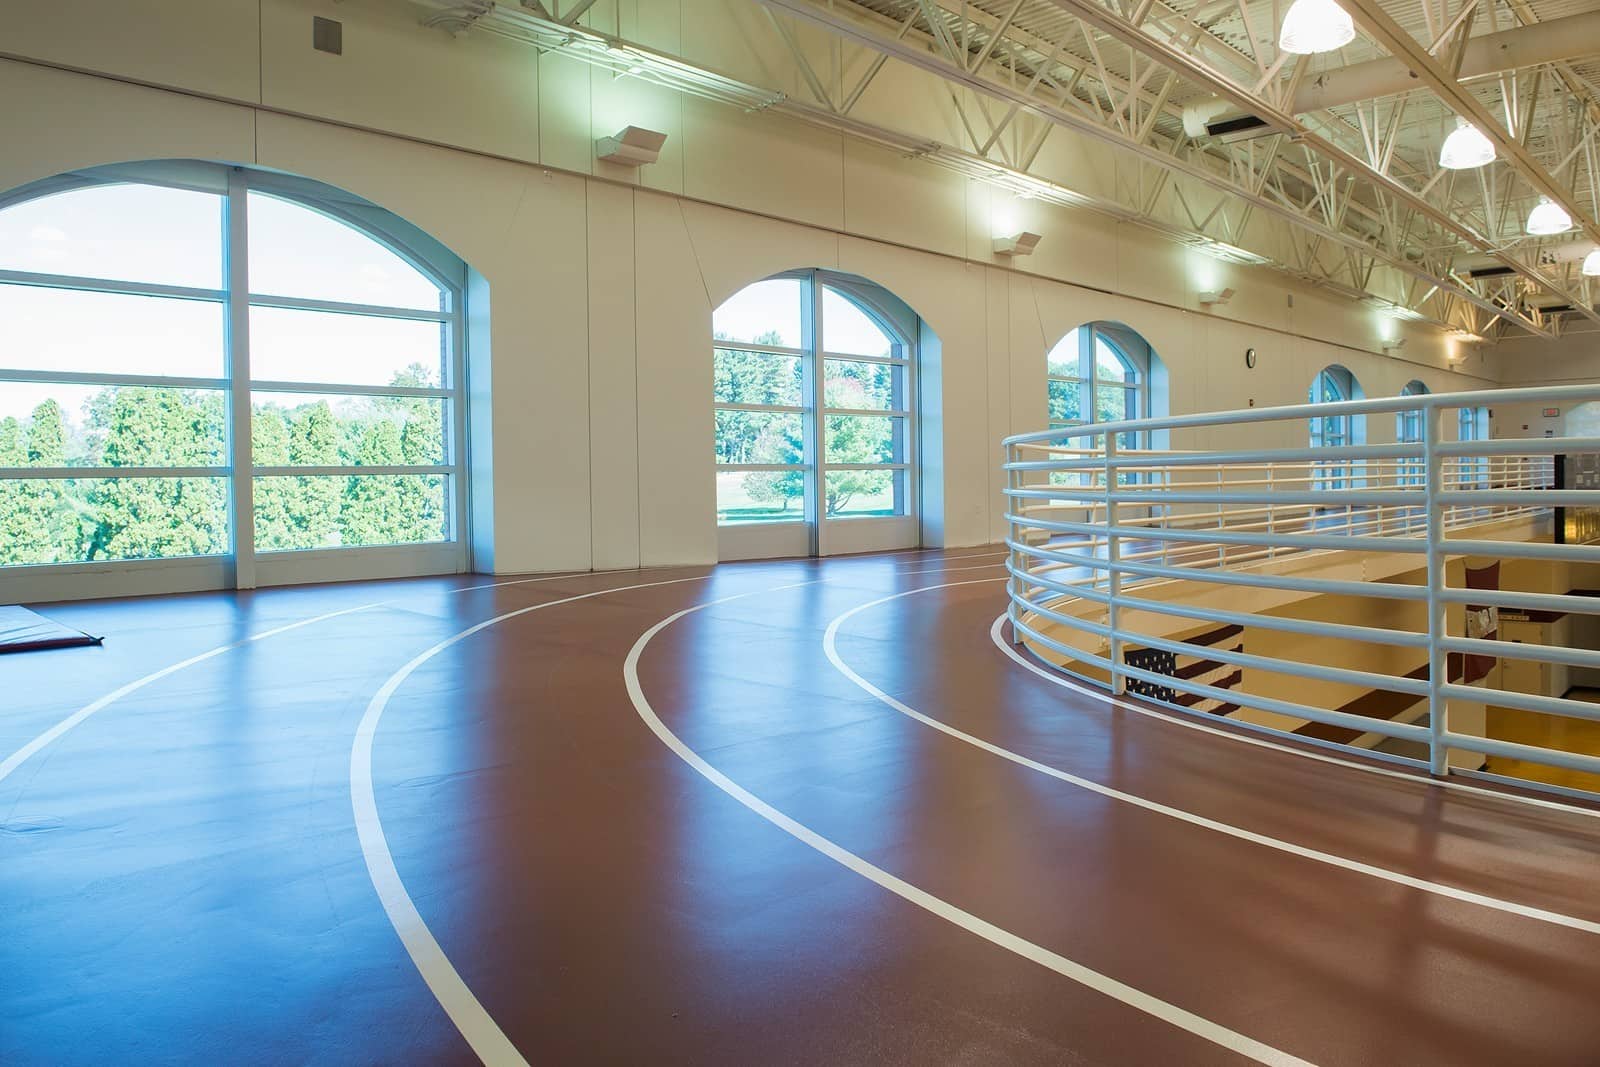 A running track inside the Athletics and Fitness Center at Vassar College, a long brown lane divided into multiple sections with large windows all the way around.